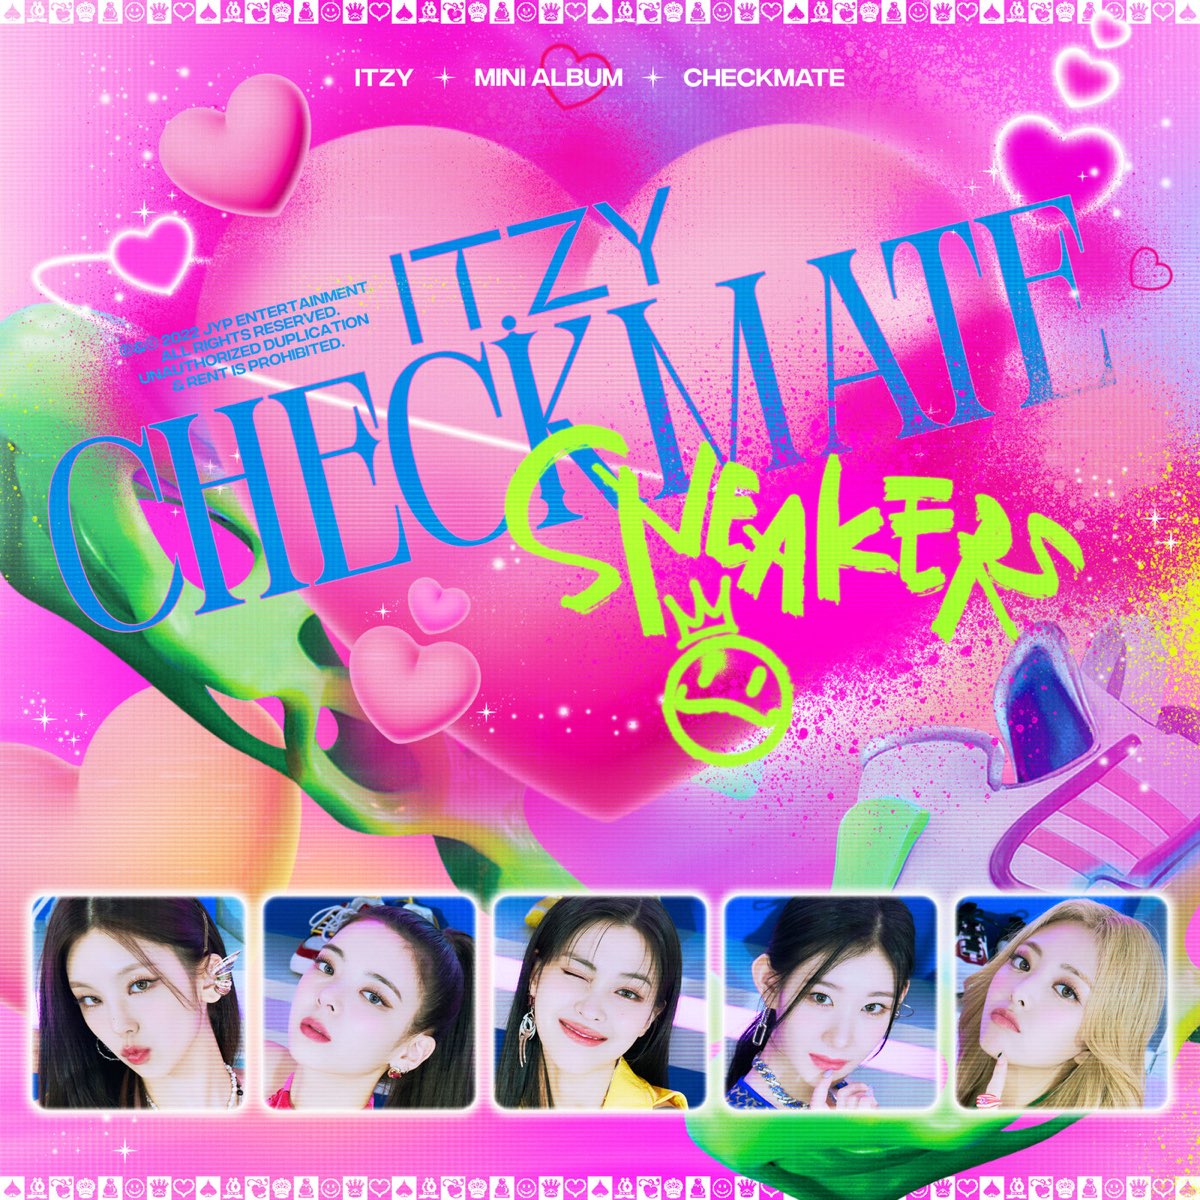 CHECKMATE - Album by ITZY - Apple Music